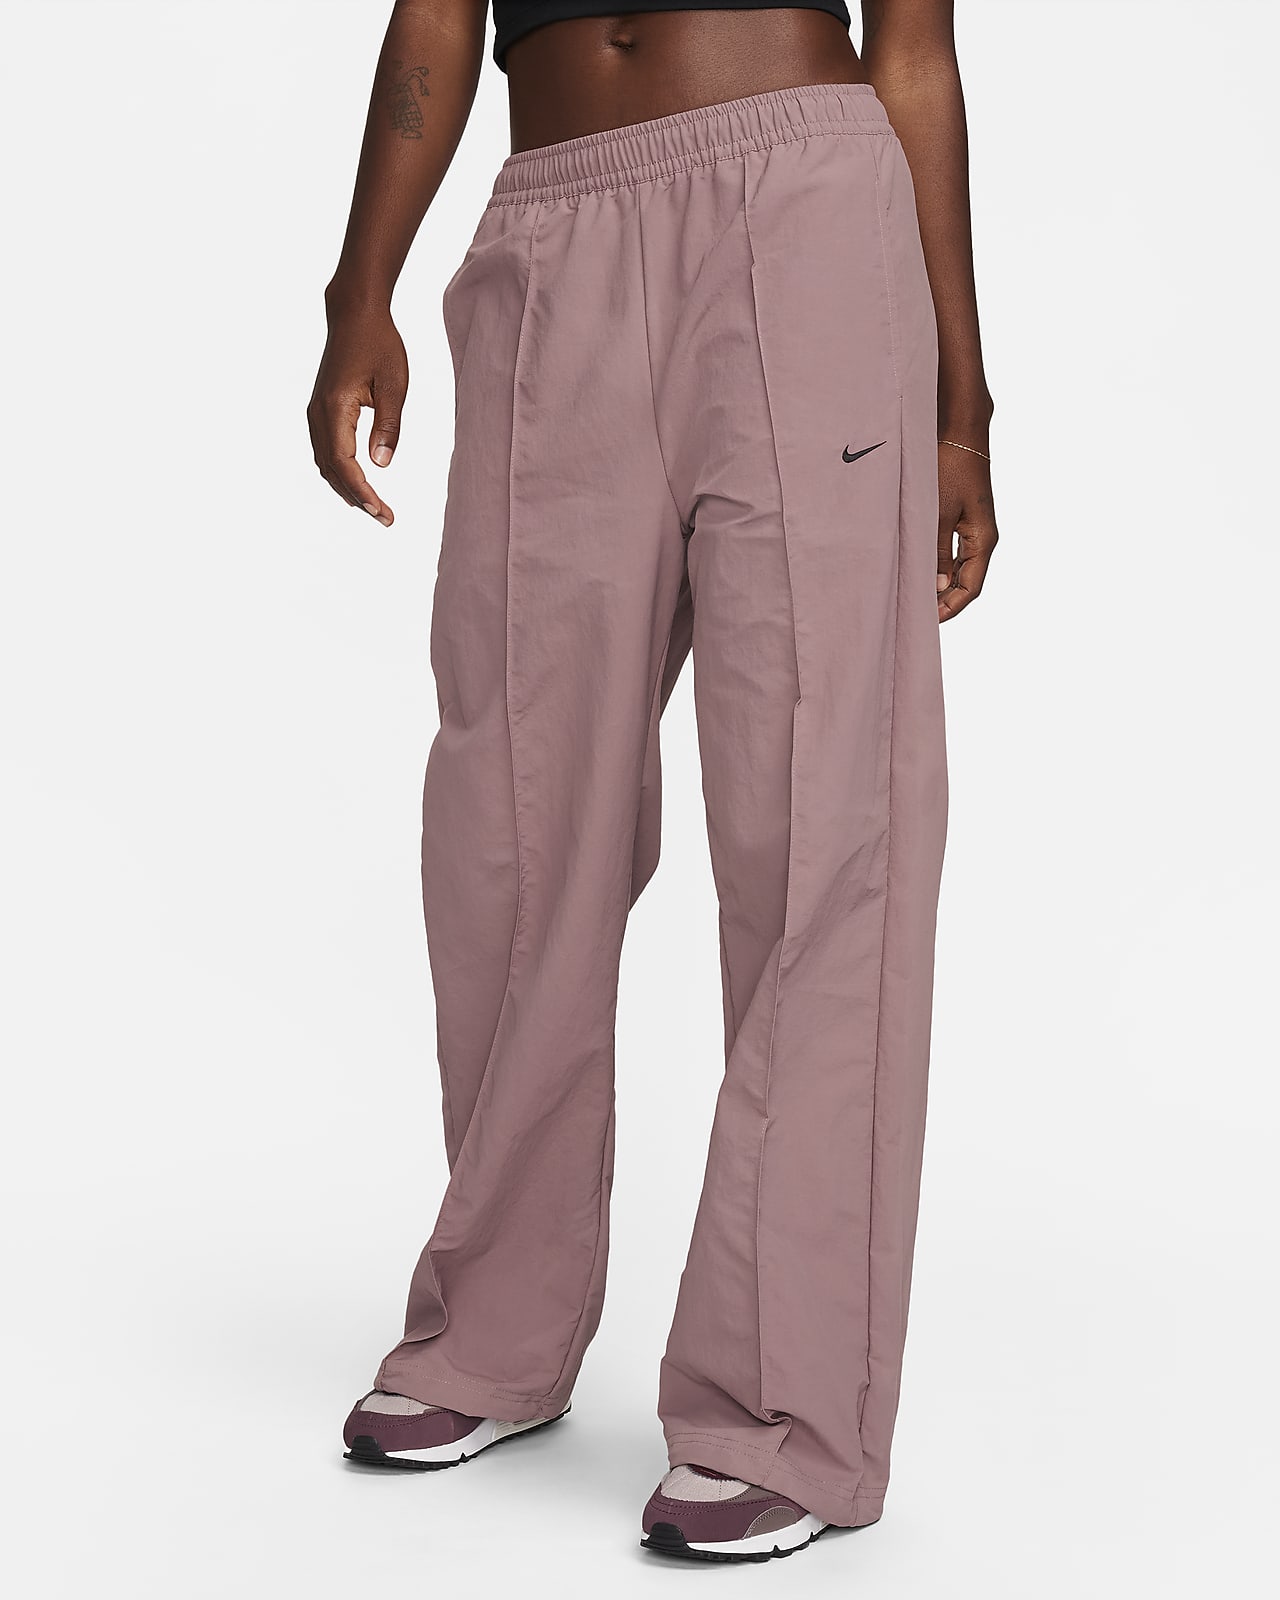 Nike Joggers Tracksuit Bottoms Cotton Cuffed Baggy Salmon Pink